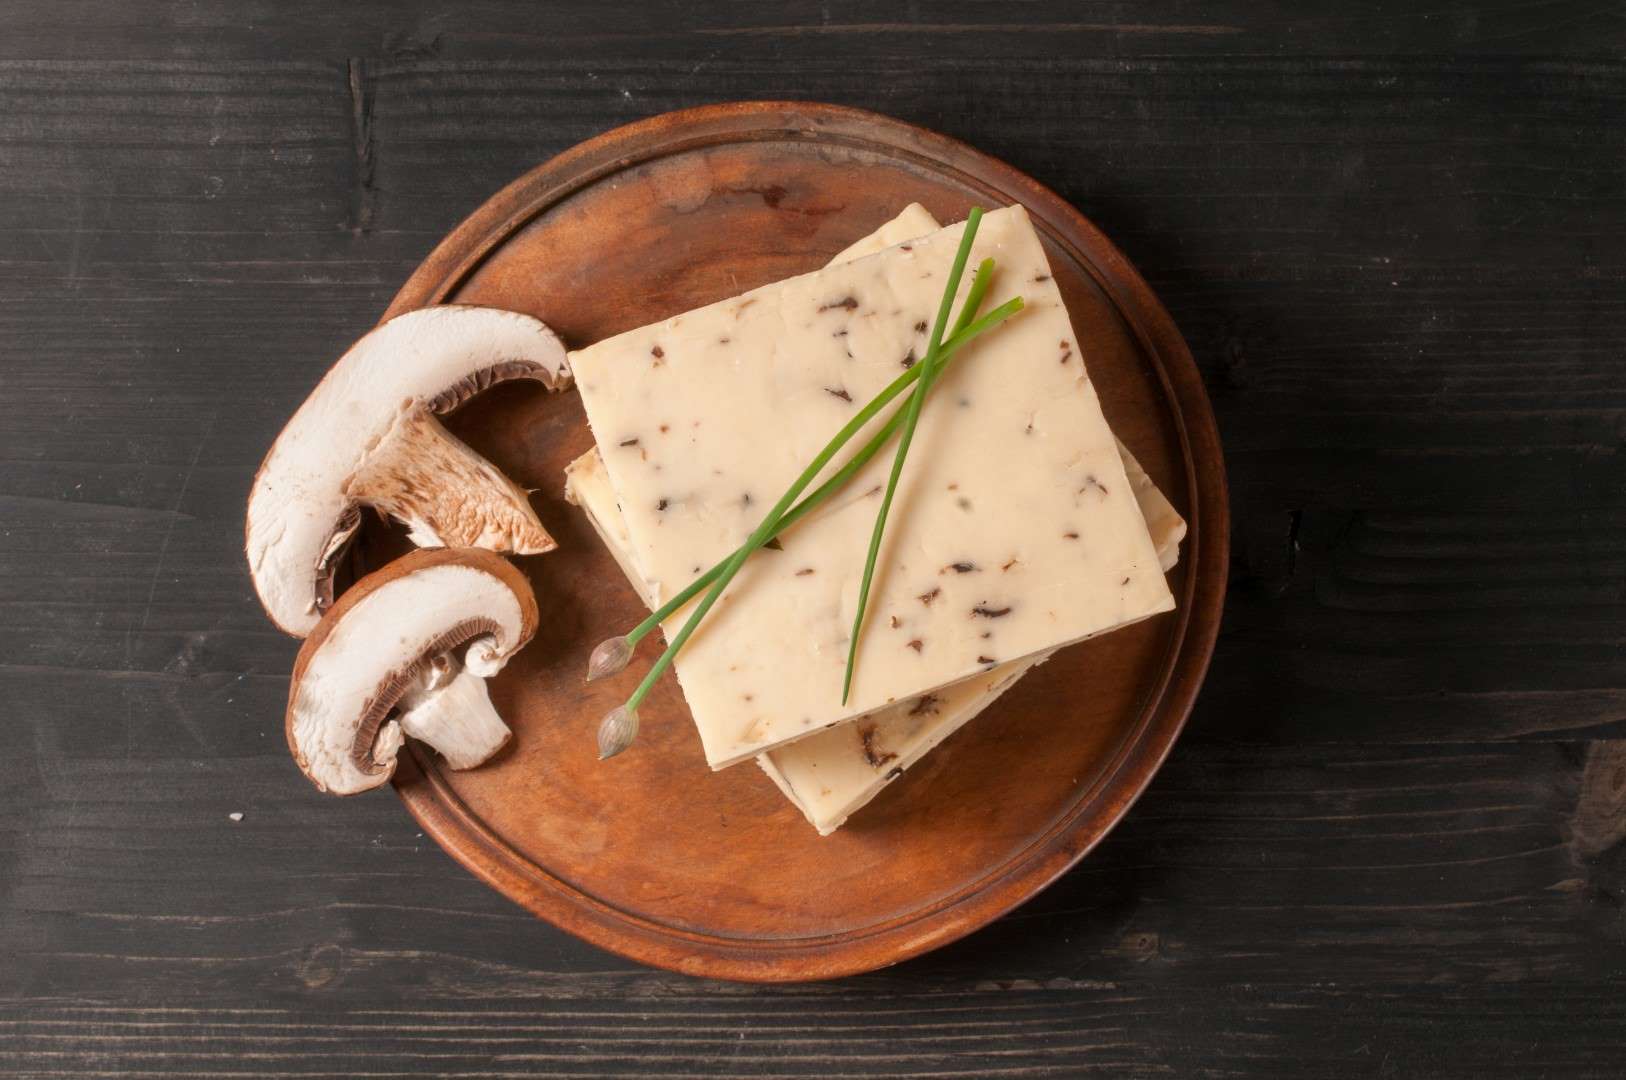 Harmony Cheese's Exclusive Mushroom and Chive cheese